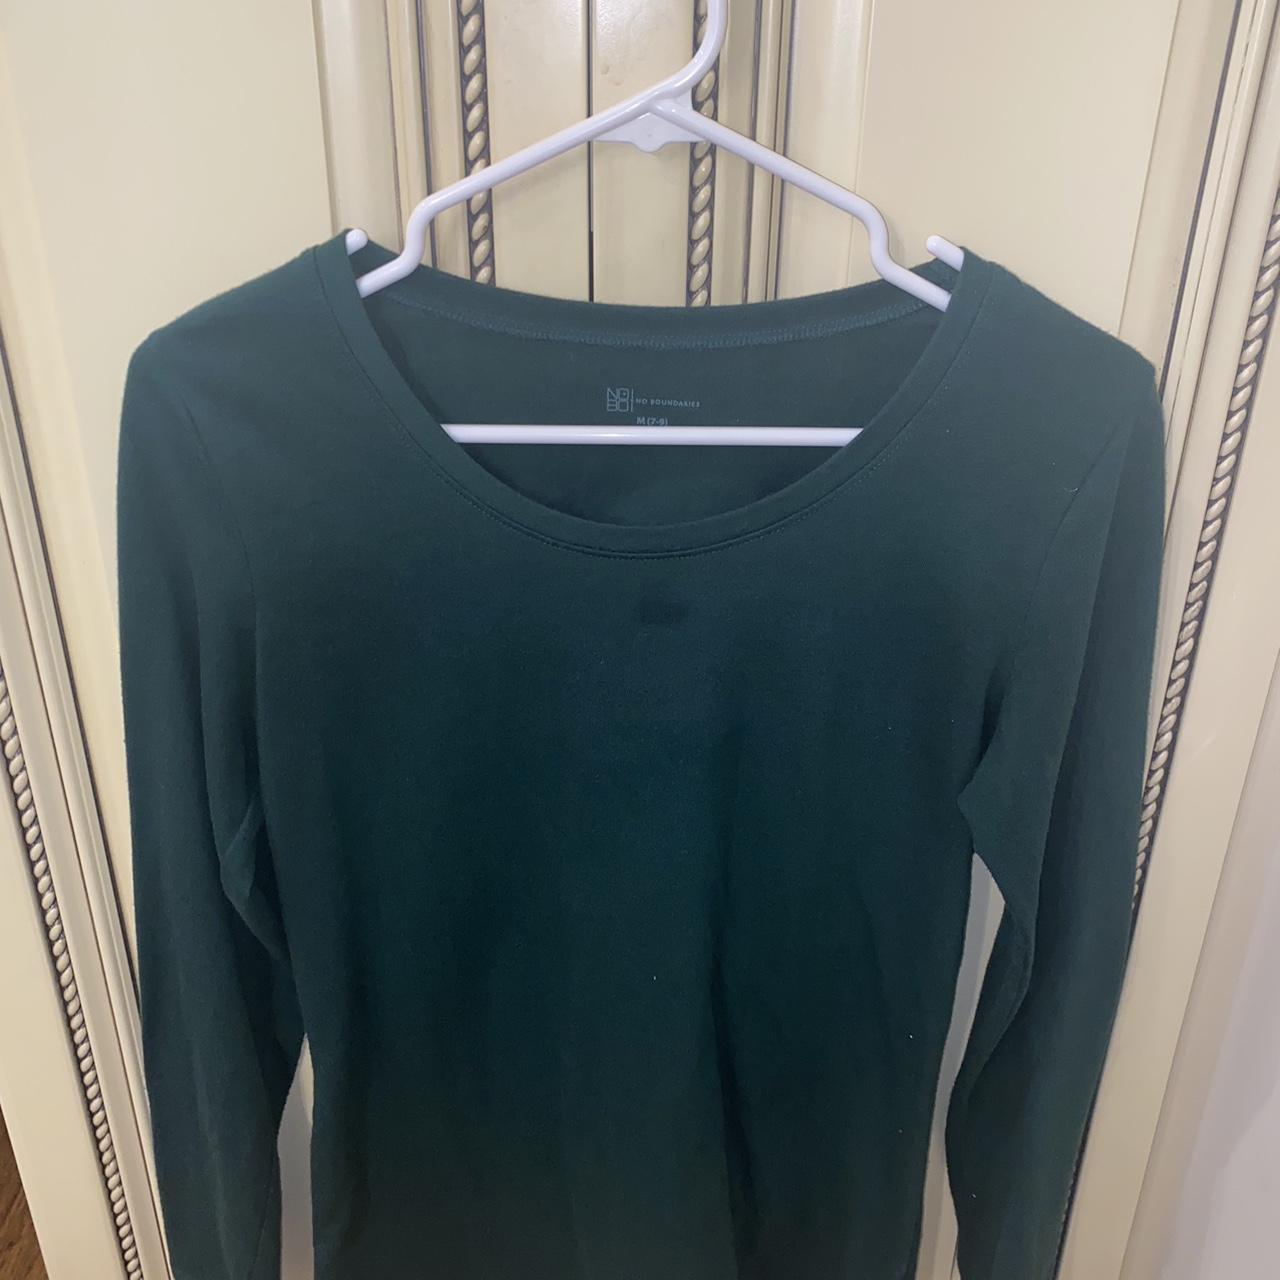 Solid Forest Green Long sleeve top🌲 Would fit a... - Depop